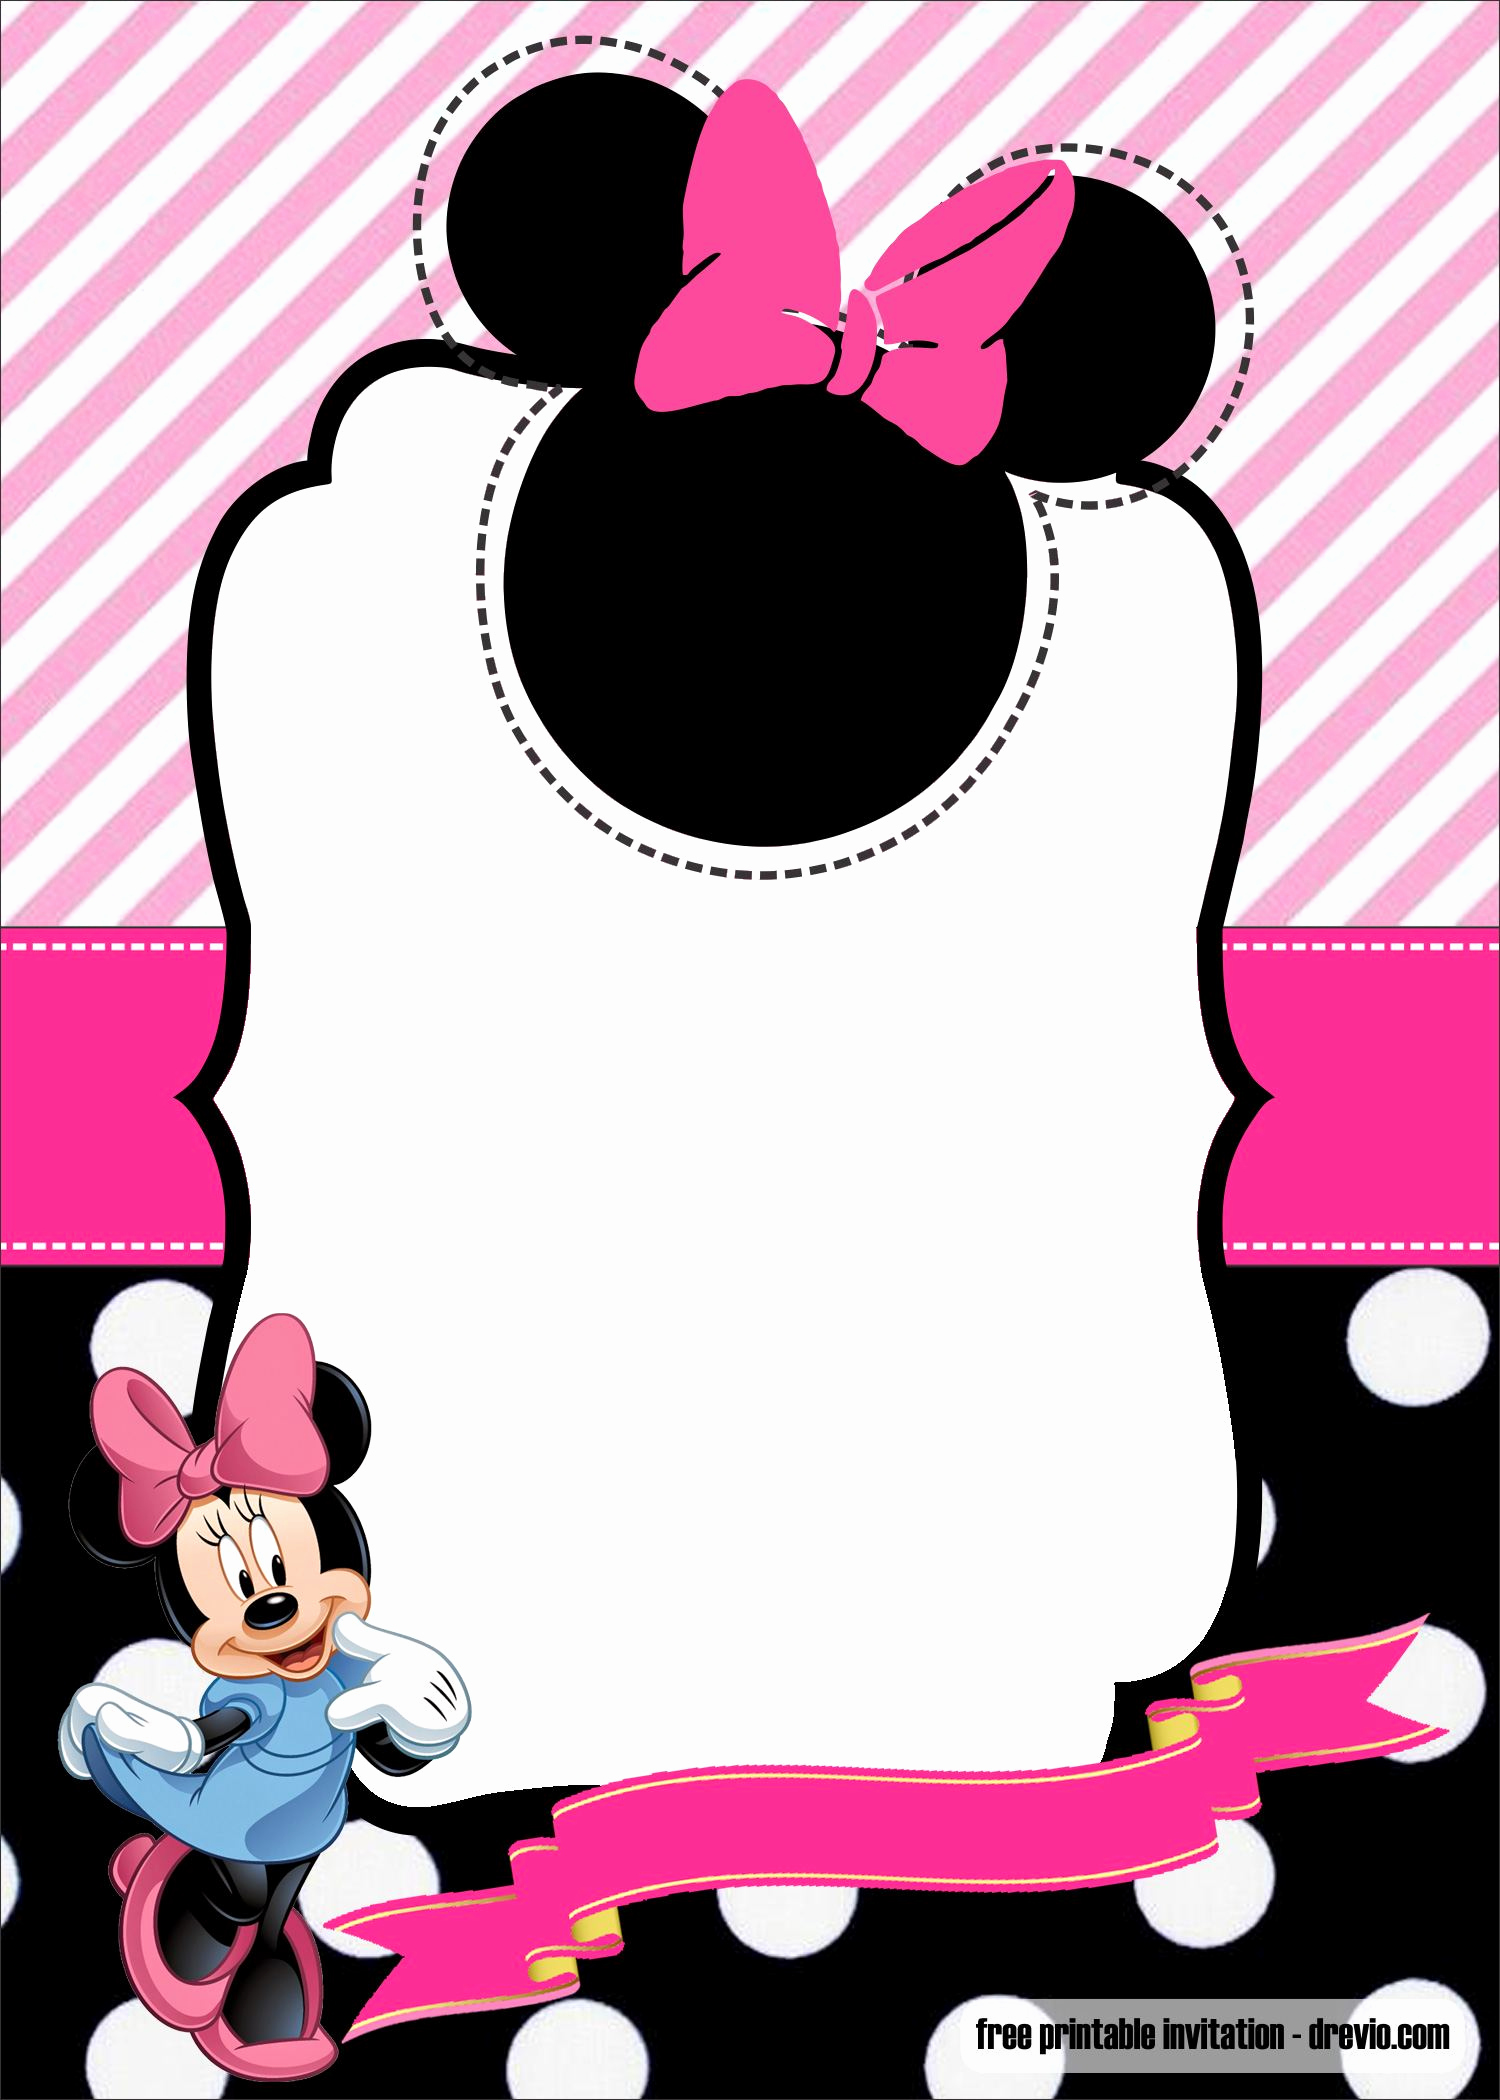 Minnie Mouse Invitation Template Inspirational Free Minnie Mouse 1st Birthday Invitation Template